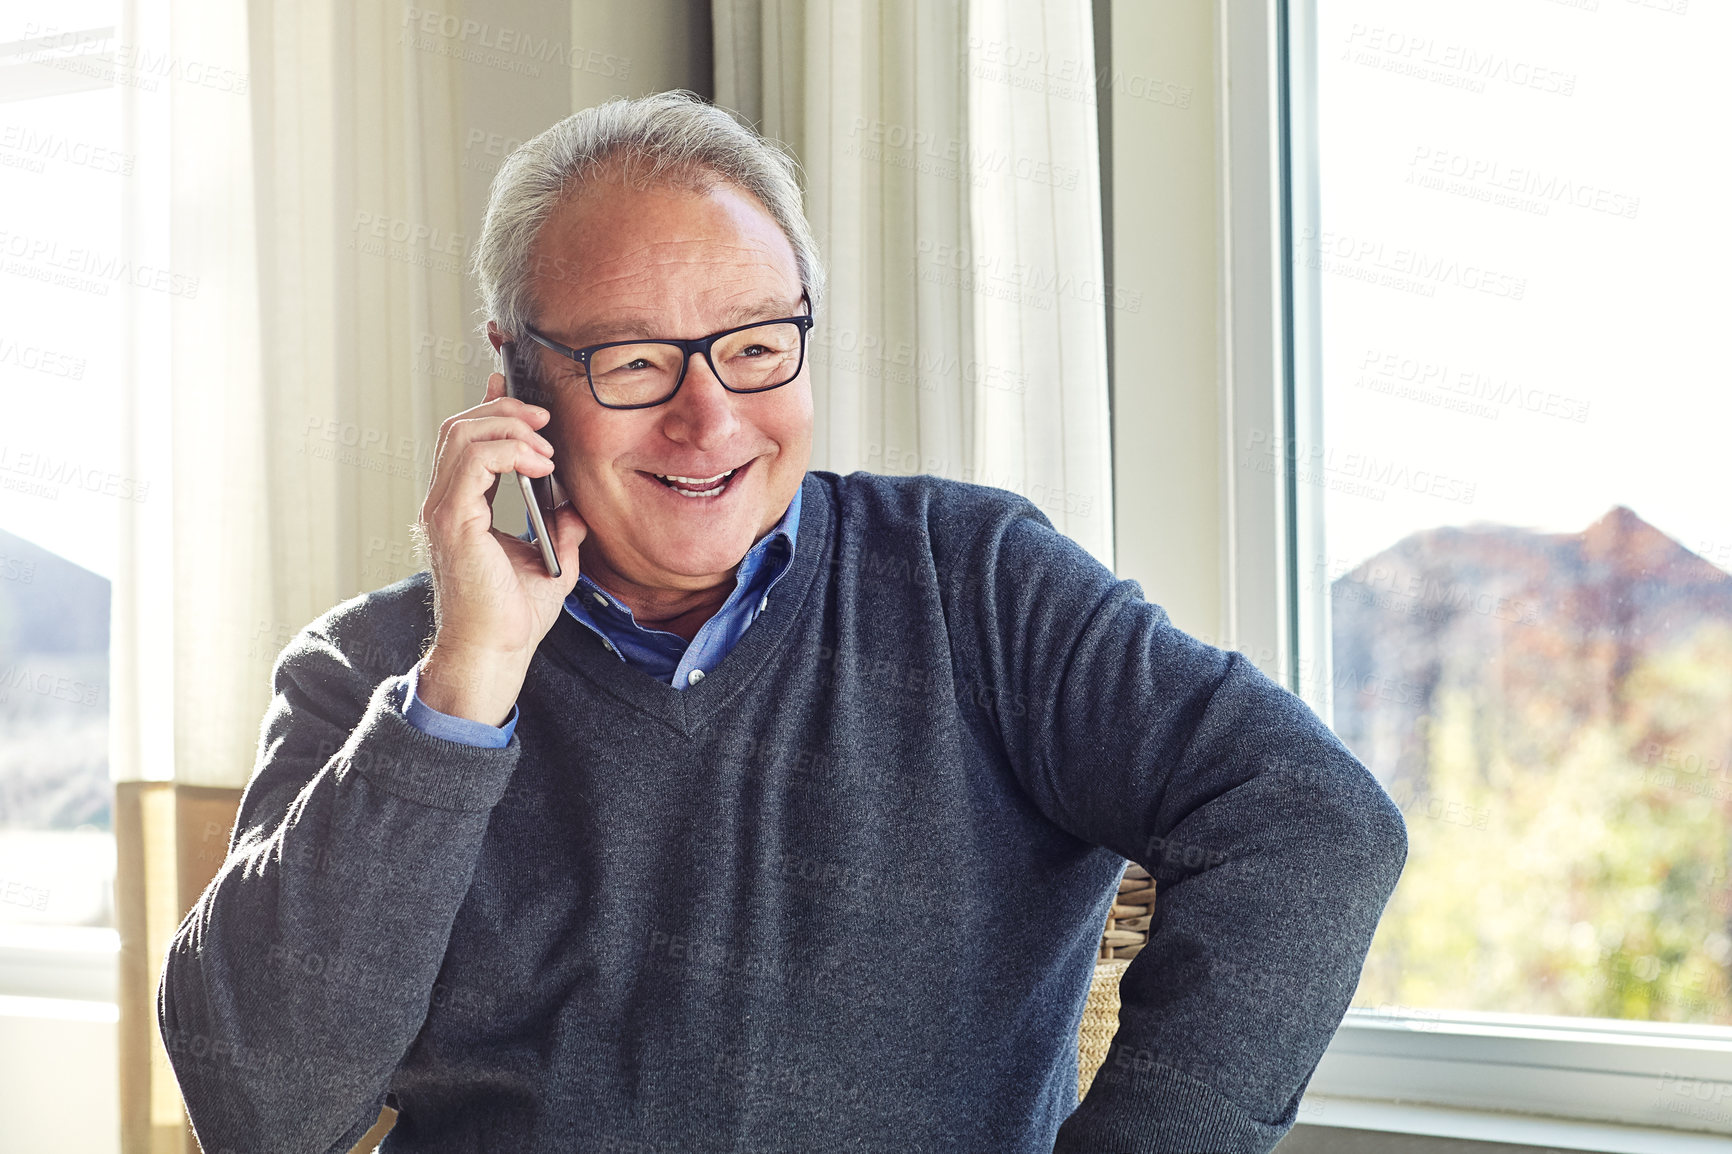 Buy stock photo Cropped shot of a senior man on a call at home